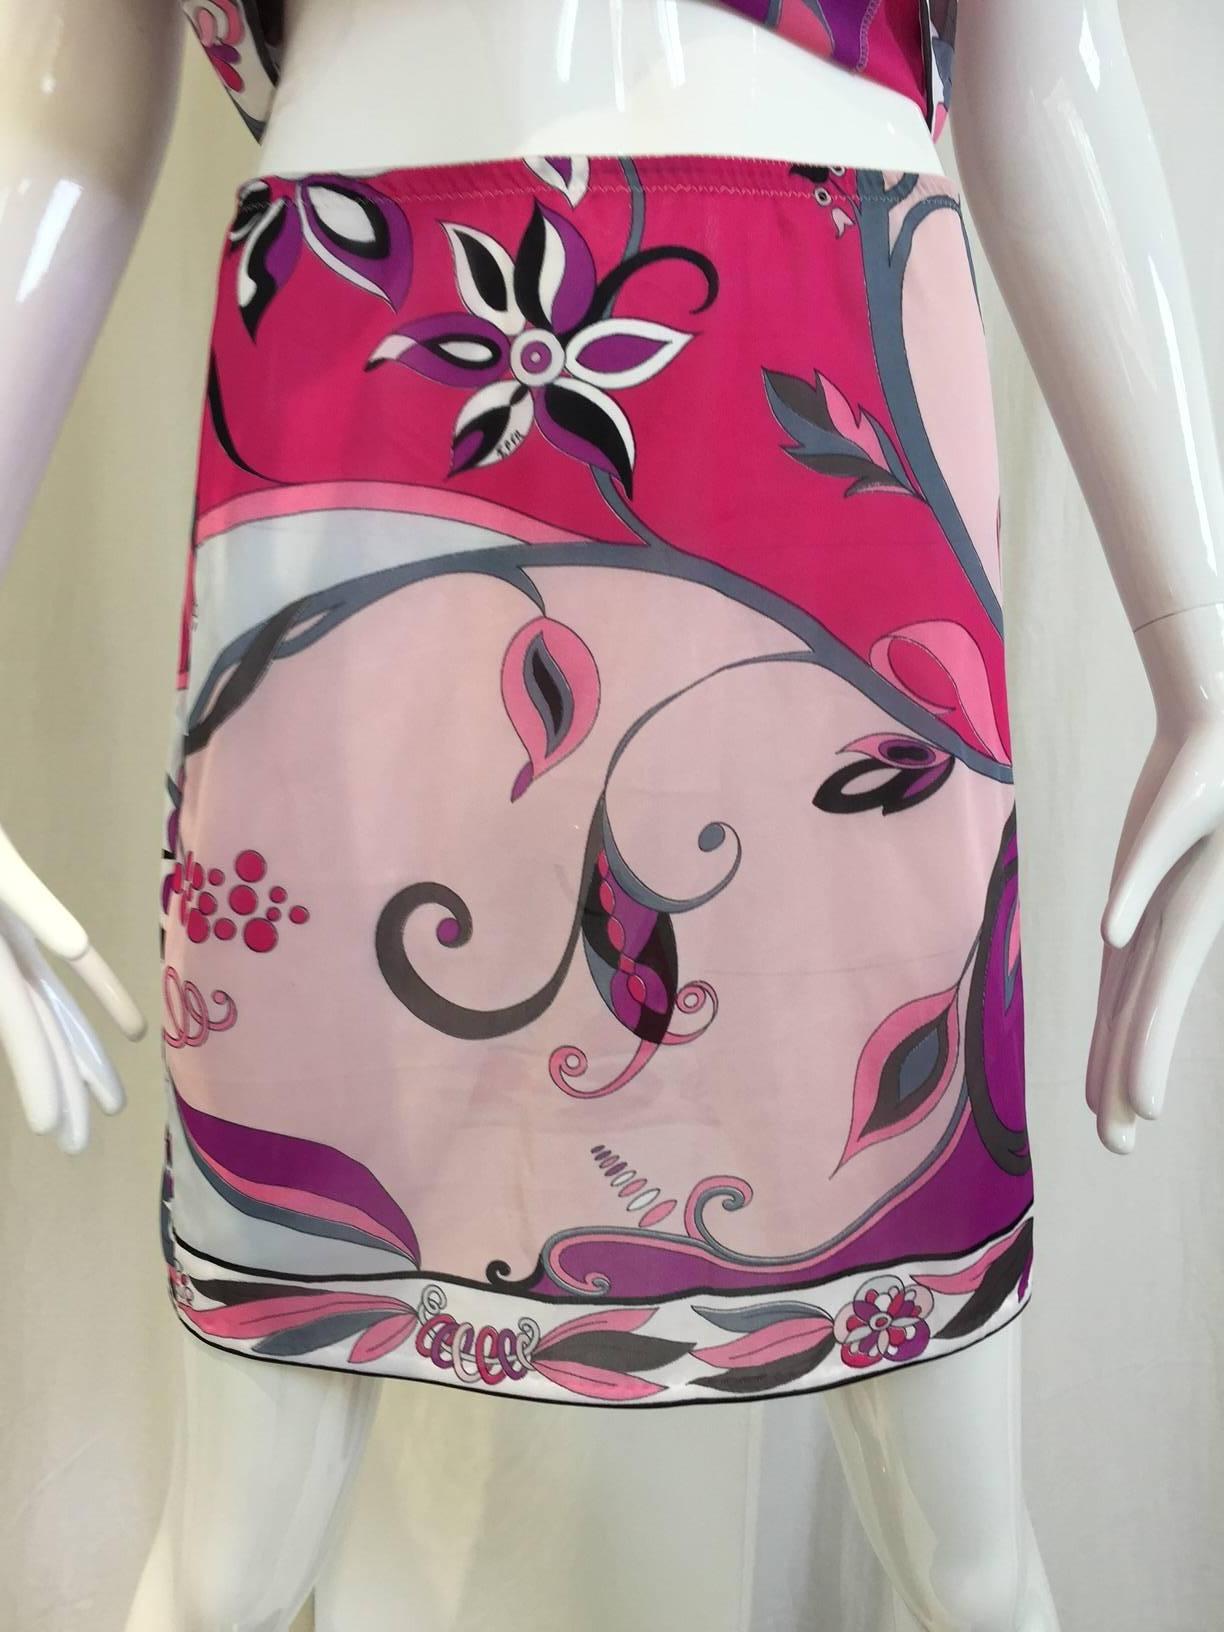 1960s PUCCI pink nylon top and skirt set. perfect beach attire.
Size: 2